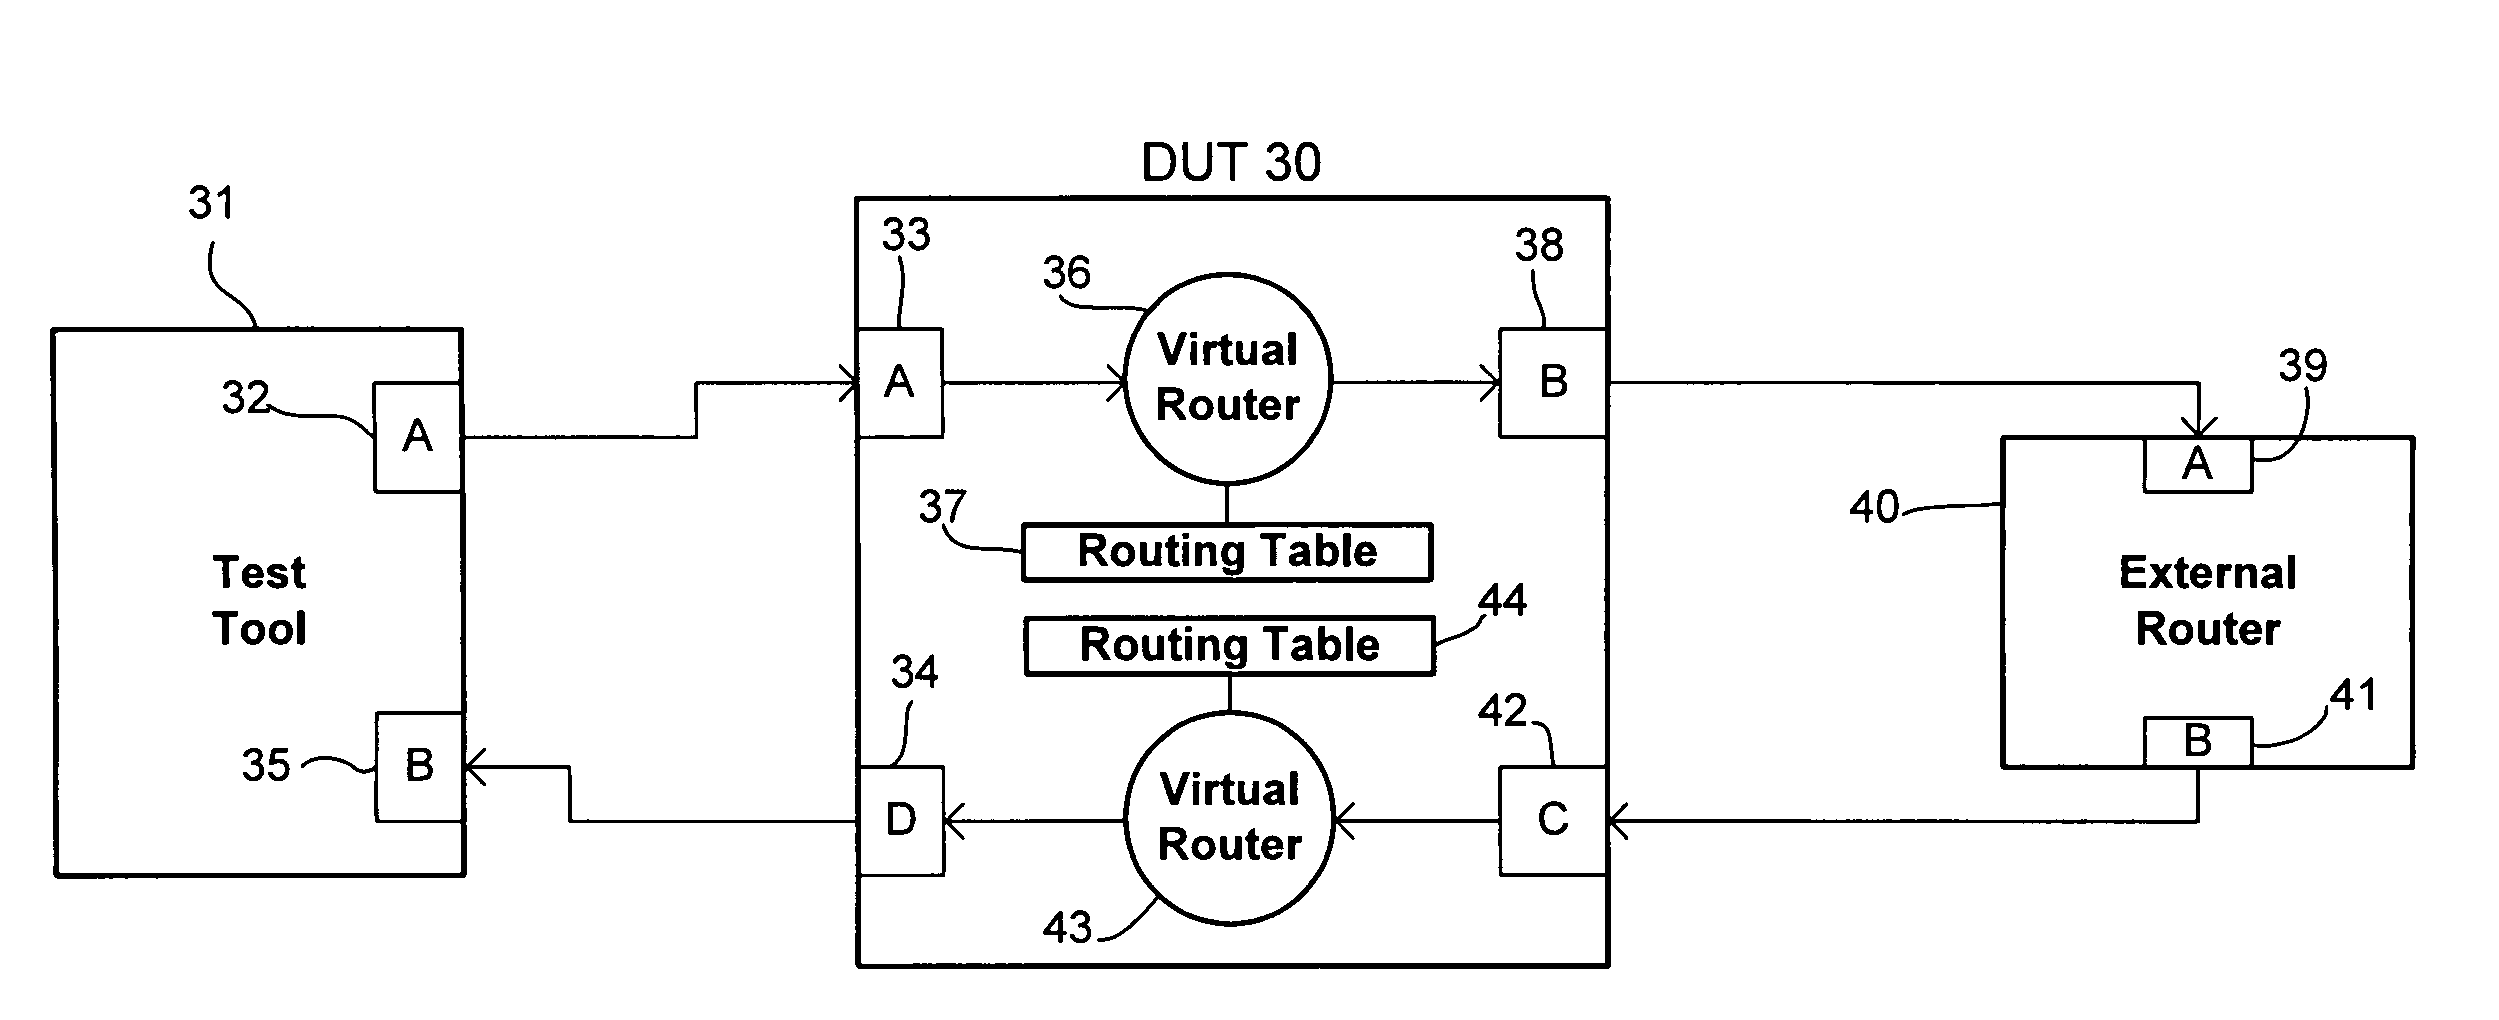 Network device testing system